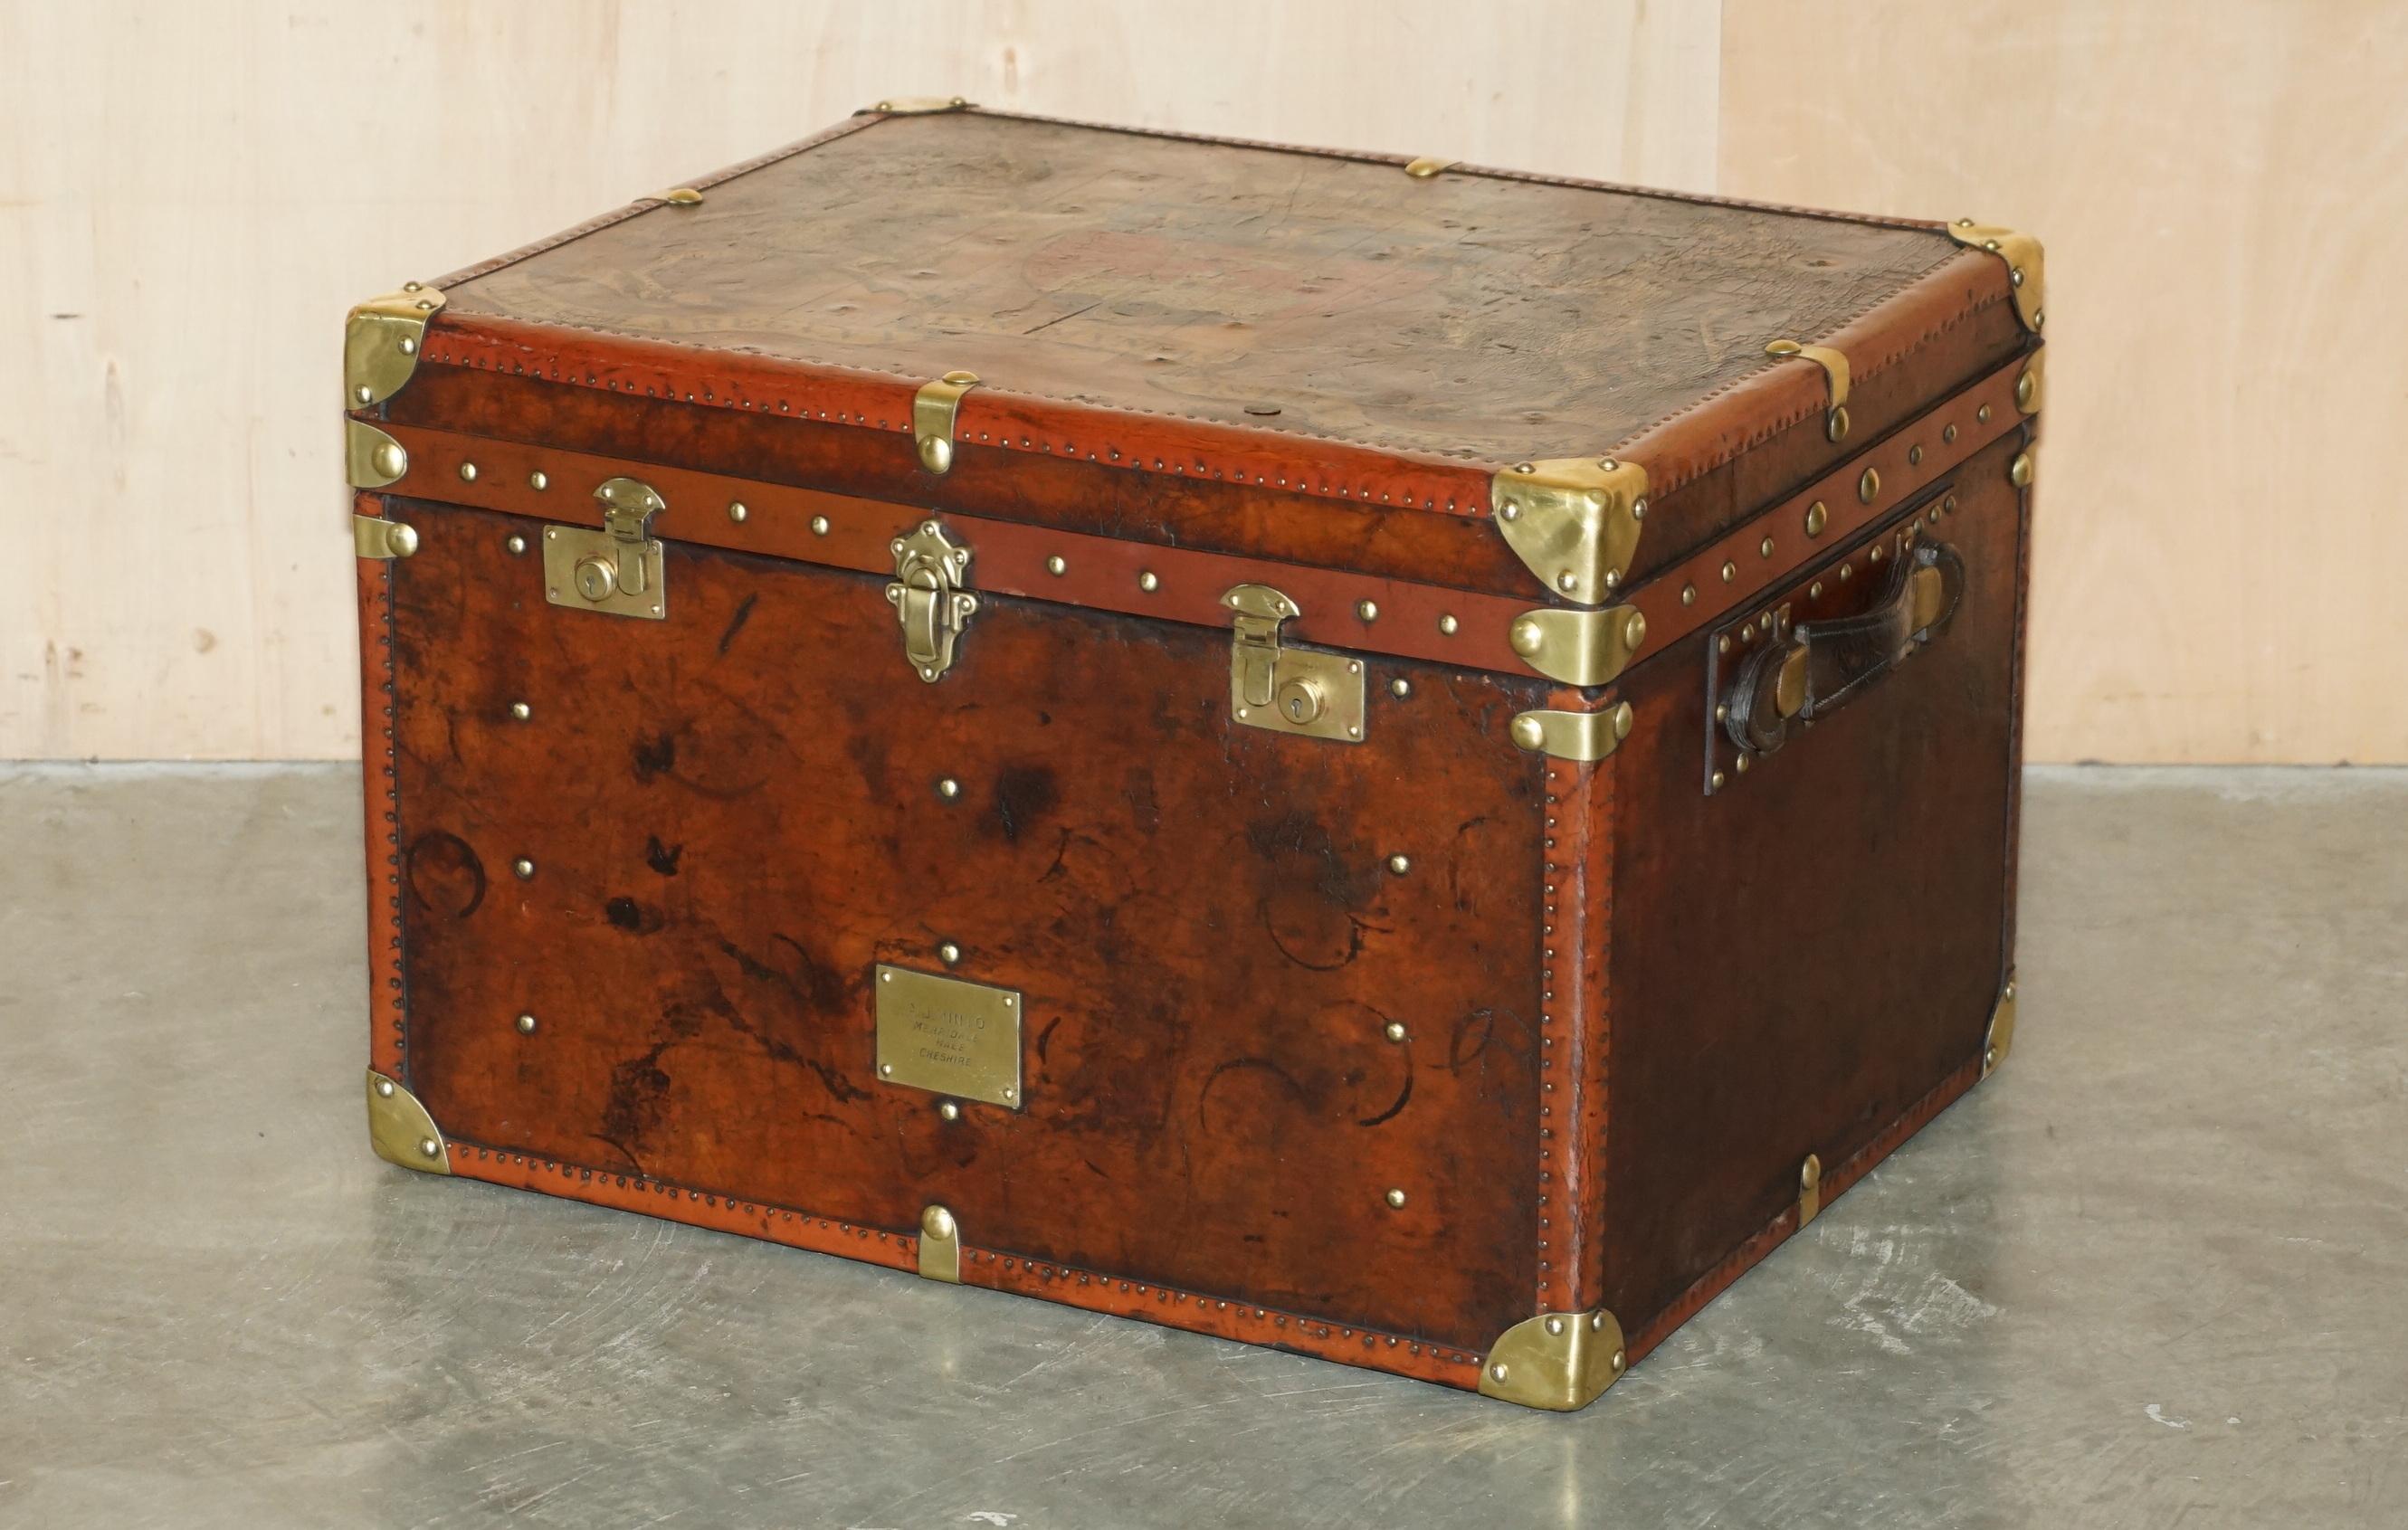 Royal House Antiques

Royal House Antiques is delighted to offer for sale this absolutely exquisite, fully restored, circa 1890-1900 hand dyed brown leather steamer trunk with one of a kind, hand painted Armorial crest coat of arms to the